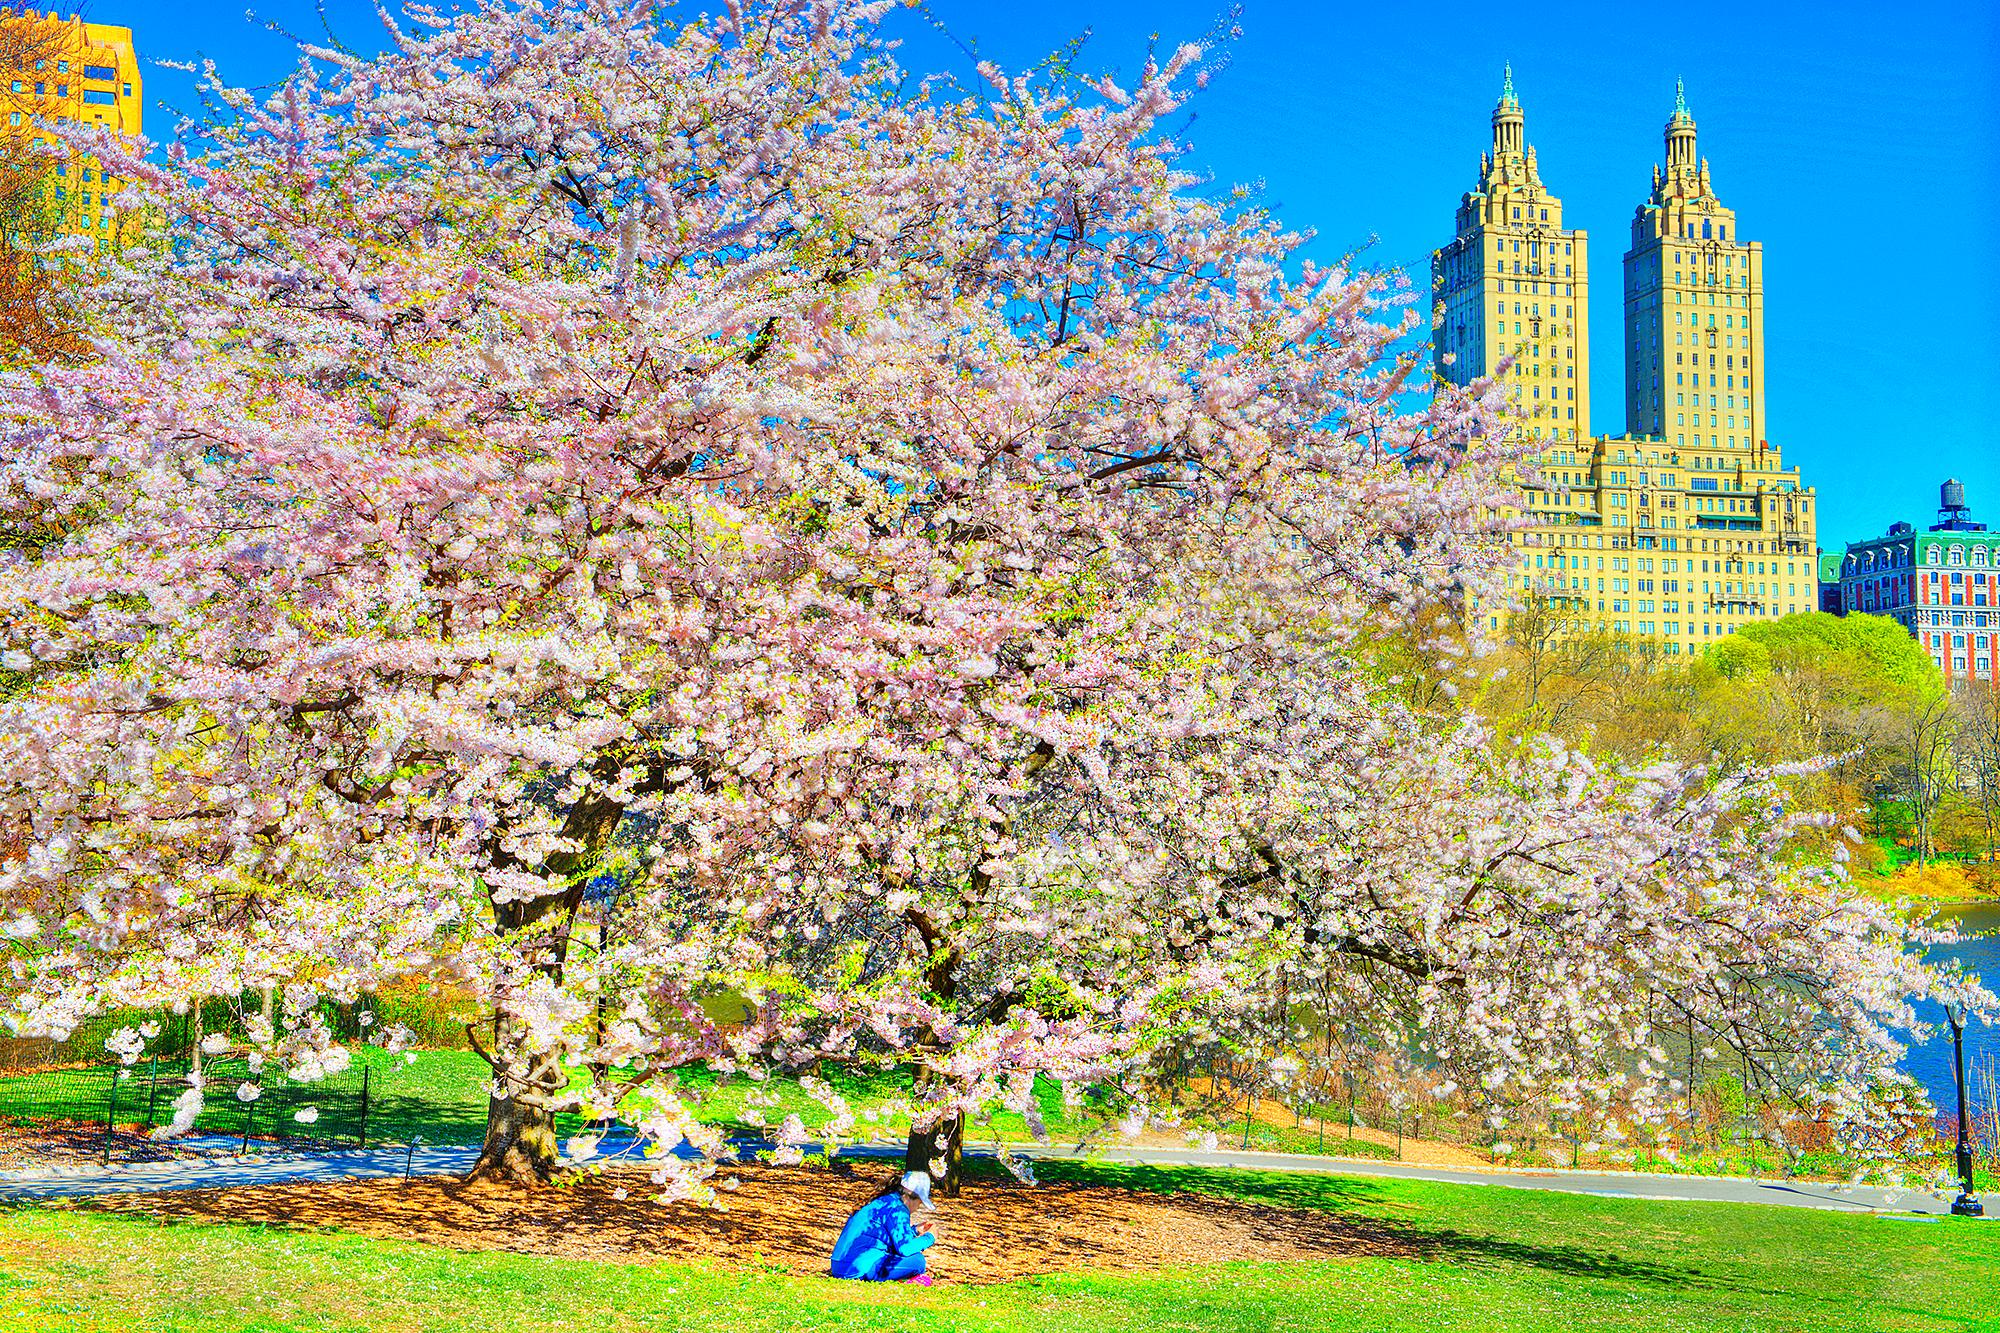 Mitchell Funk Landscape Photograph - Timeless Cherry Blossoms in Central Park  Pre-War Architecture